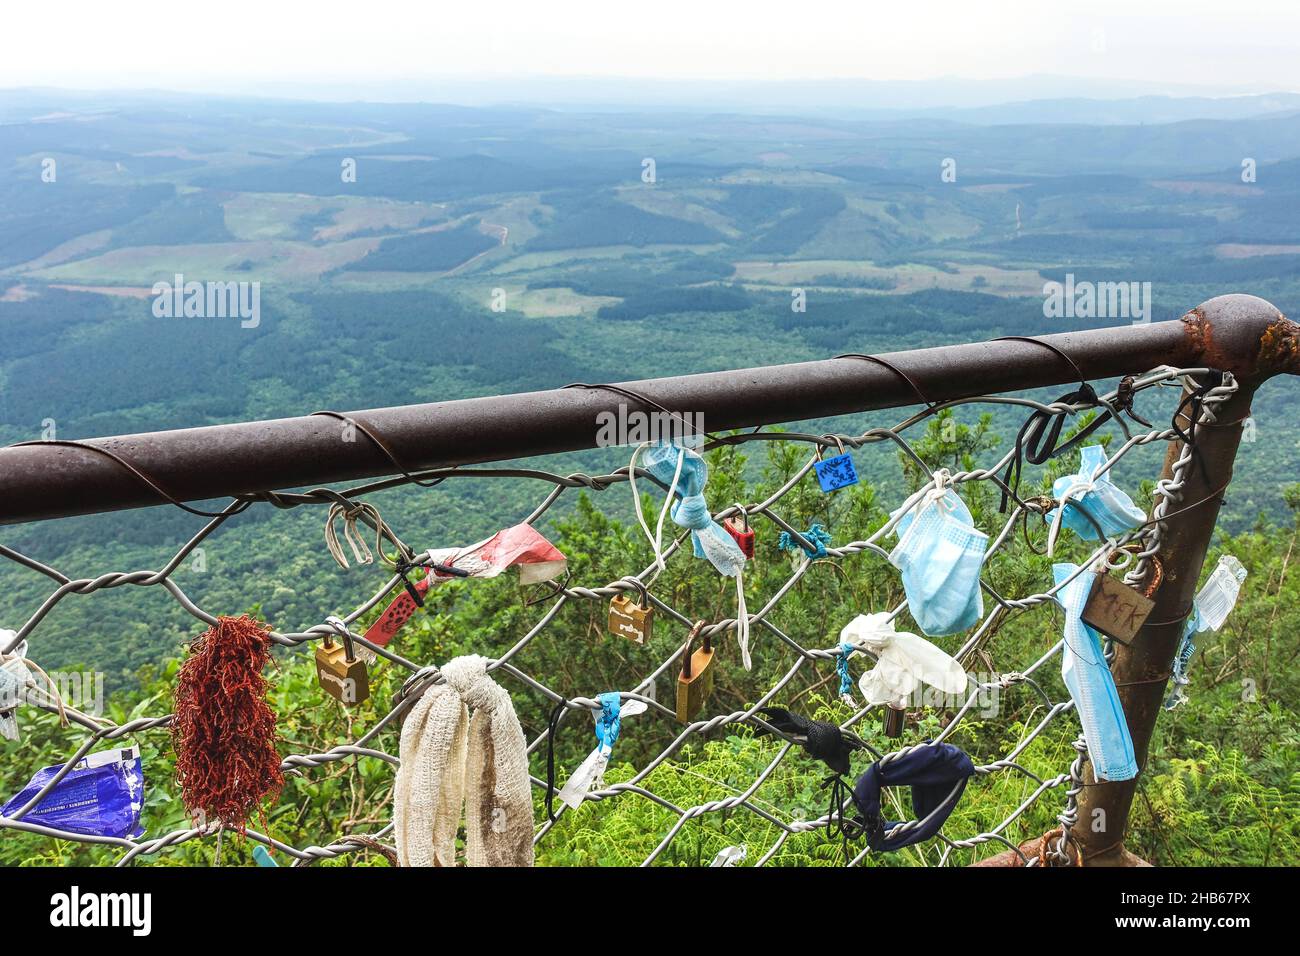 Traveling during the COVID19 pandemic: Locks and face masks on the fence at God's Window viewpoint alongside the panorama route, South Africa Stock Photo